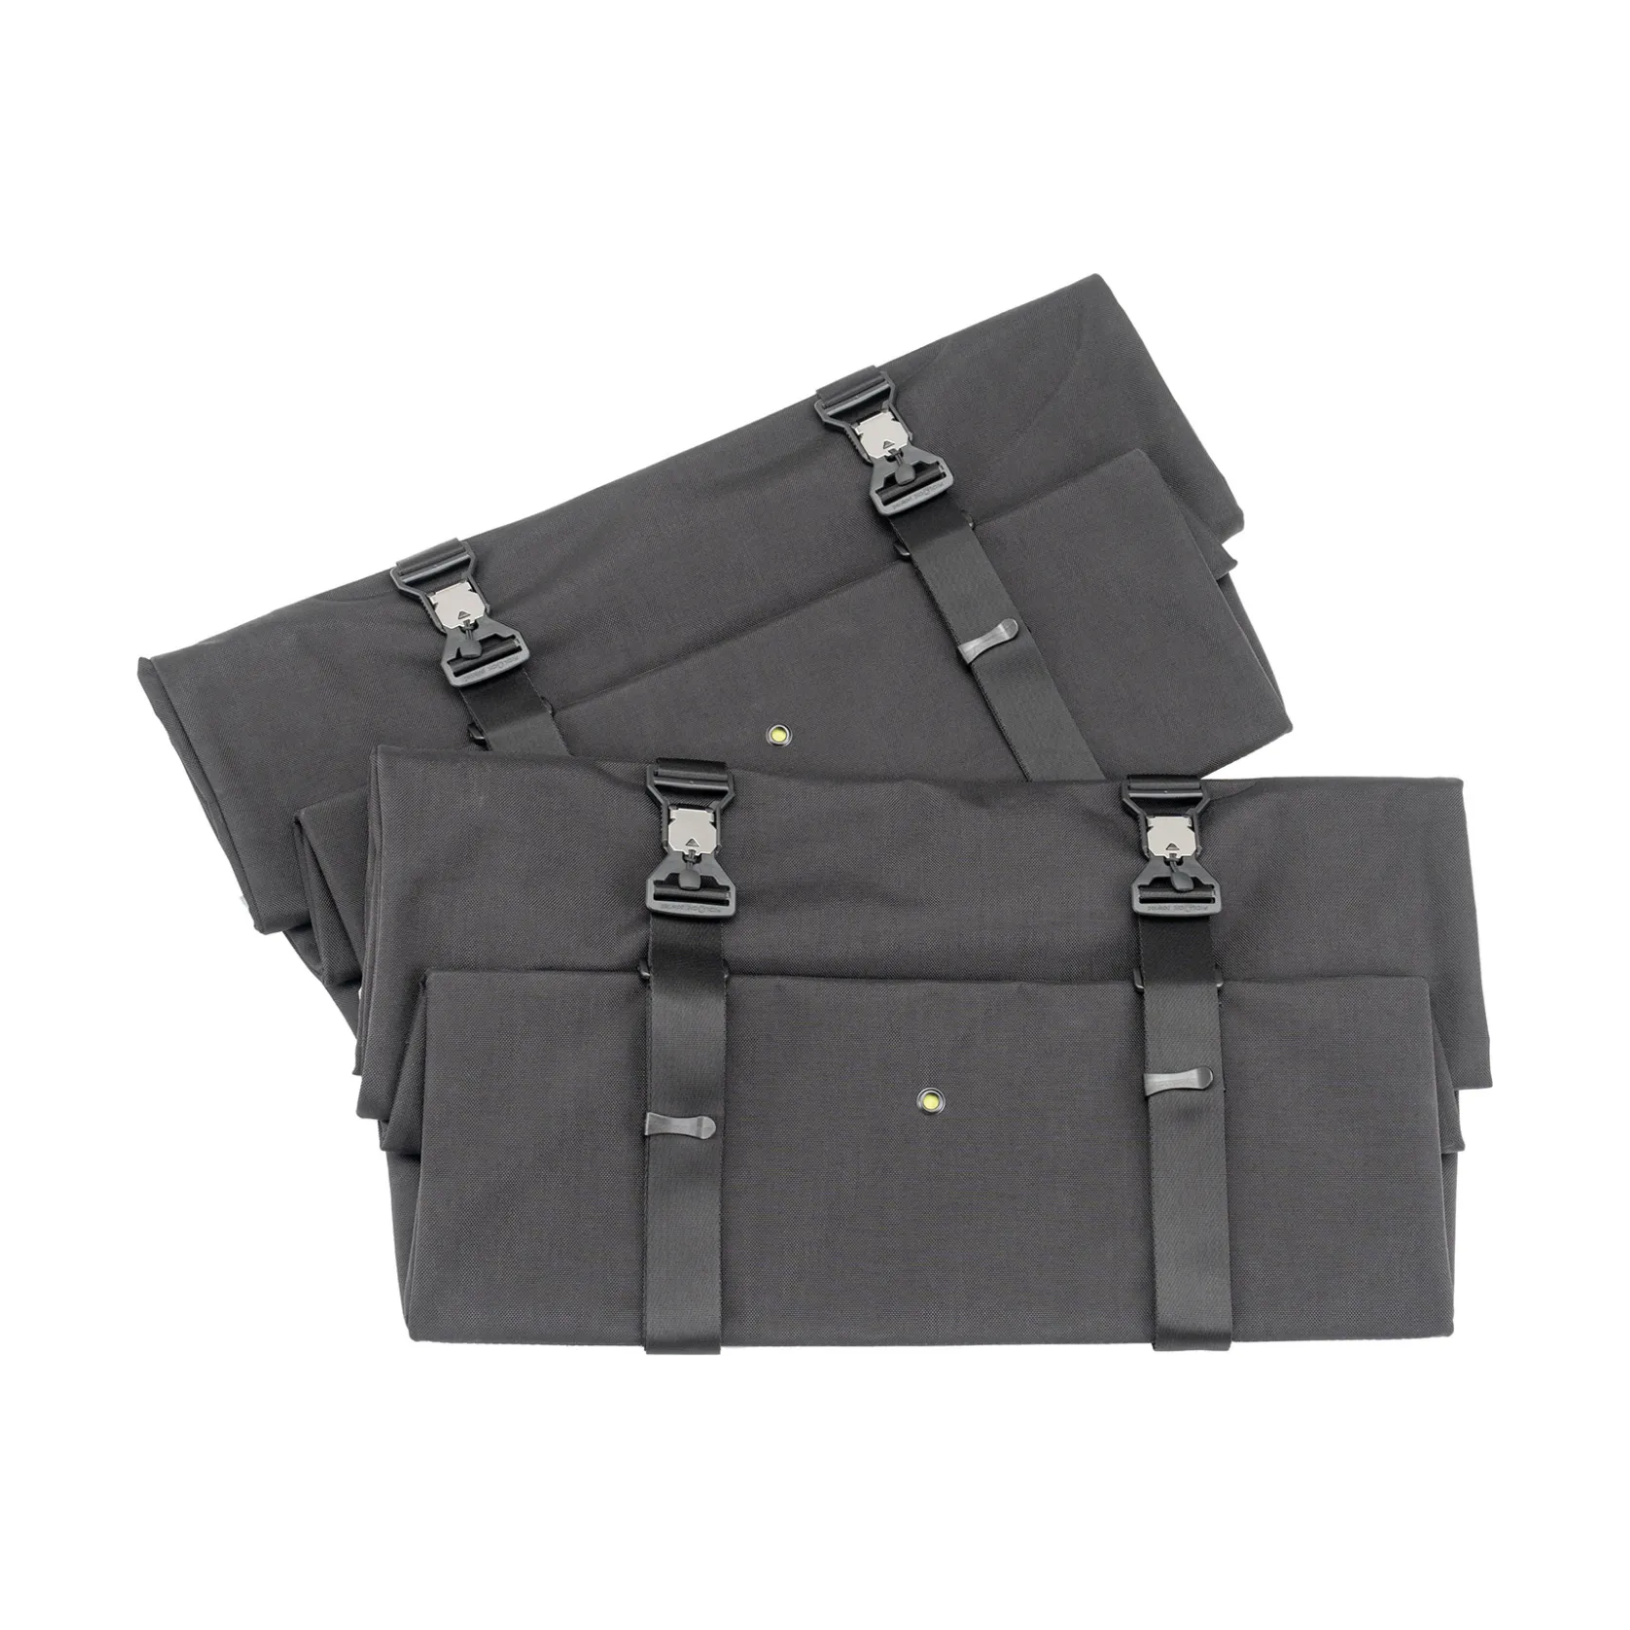 Tern Cargo Hold 52 Panniers - Power in Motion